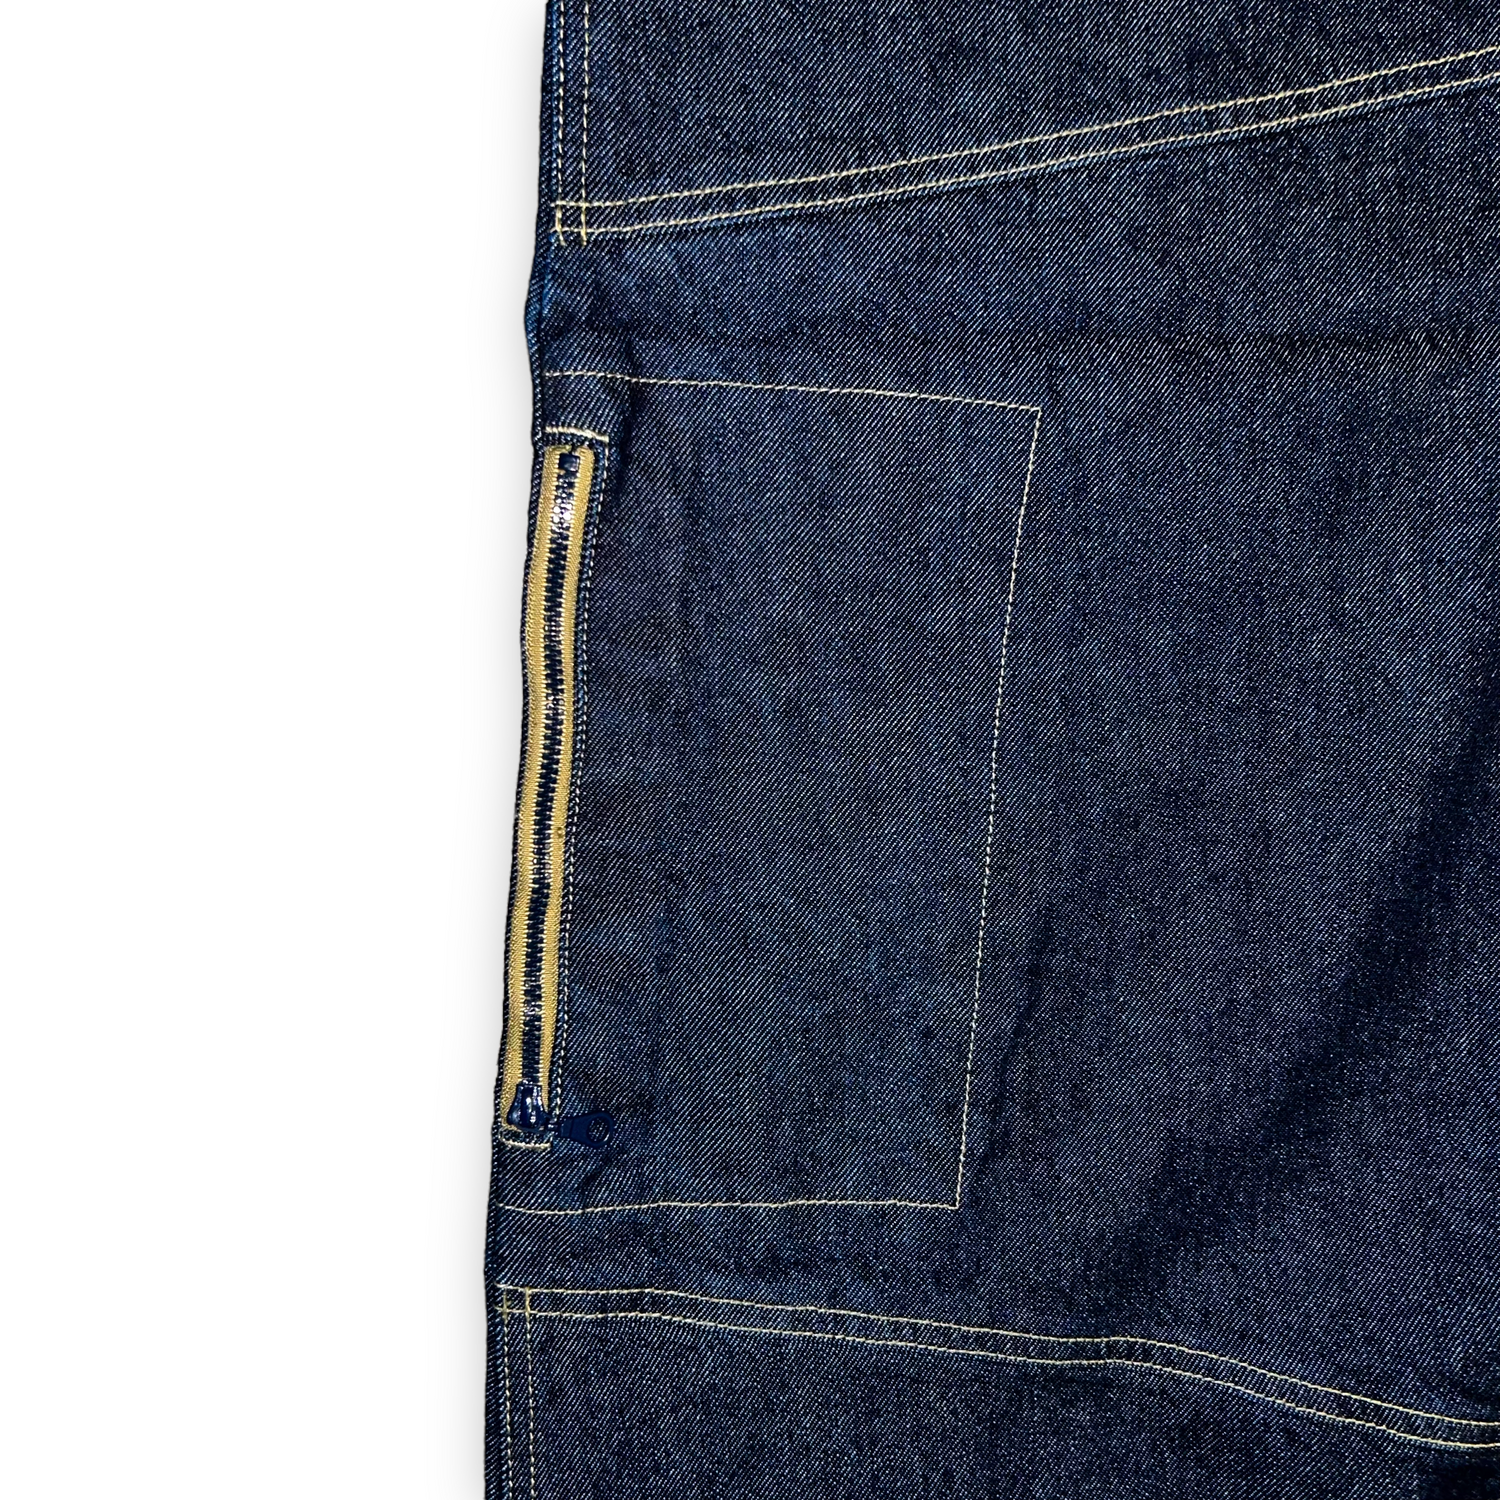 Urban Expedition UBX vintage baggy jeans